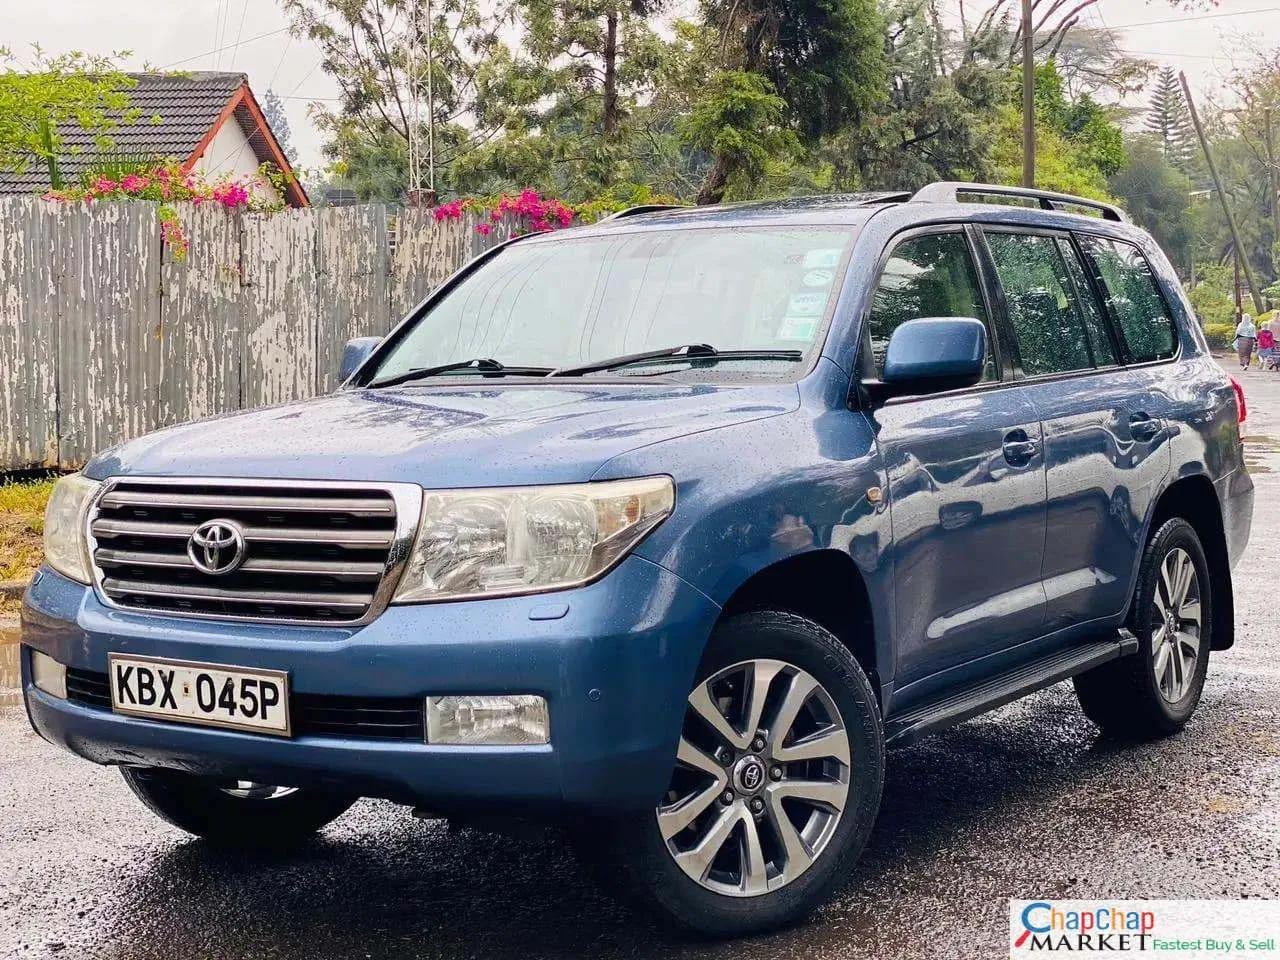 Cars Cars For Sale/Vehicles-Toyota Land cruiser V8 DIESEL 2011 SUNROOF leather LOCAL ASSEMBLY TRADE IN OK EXCLUSIVE for Sale in Kenya 7